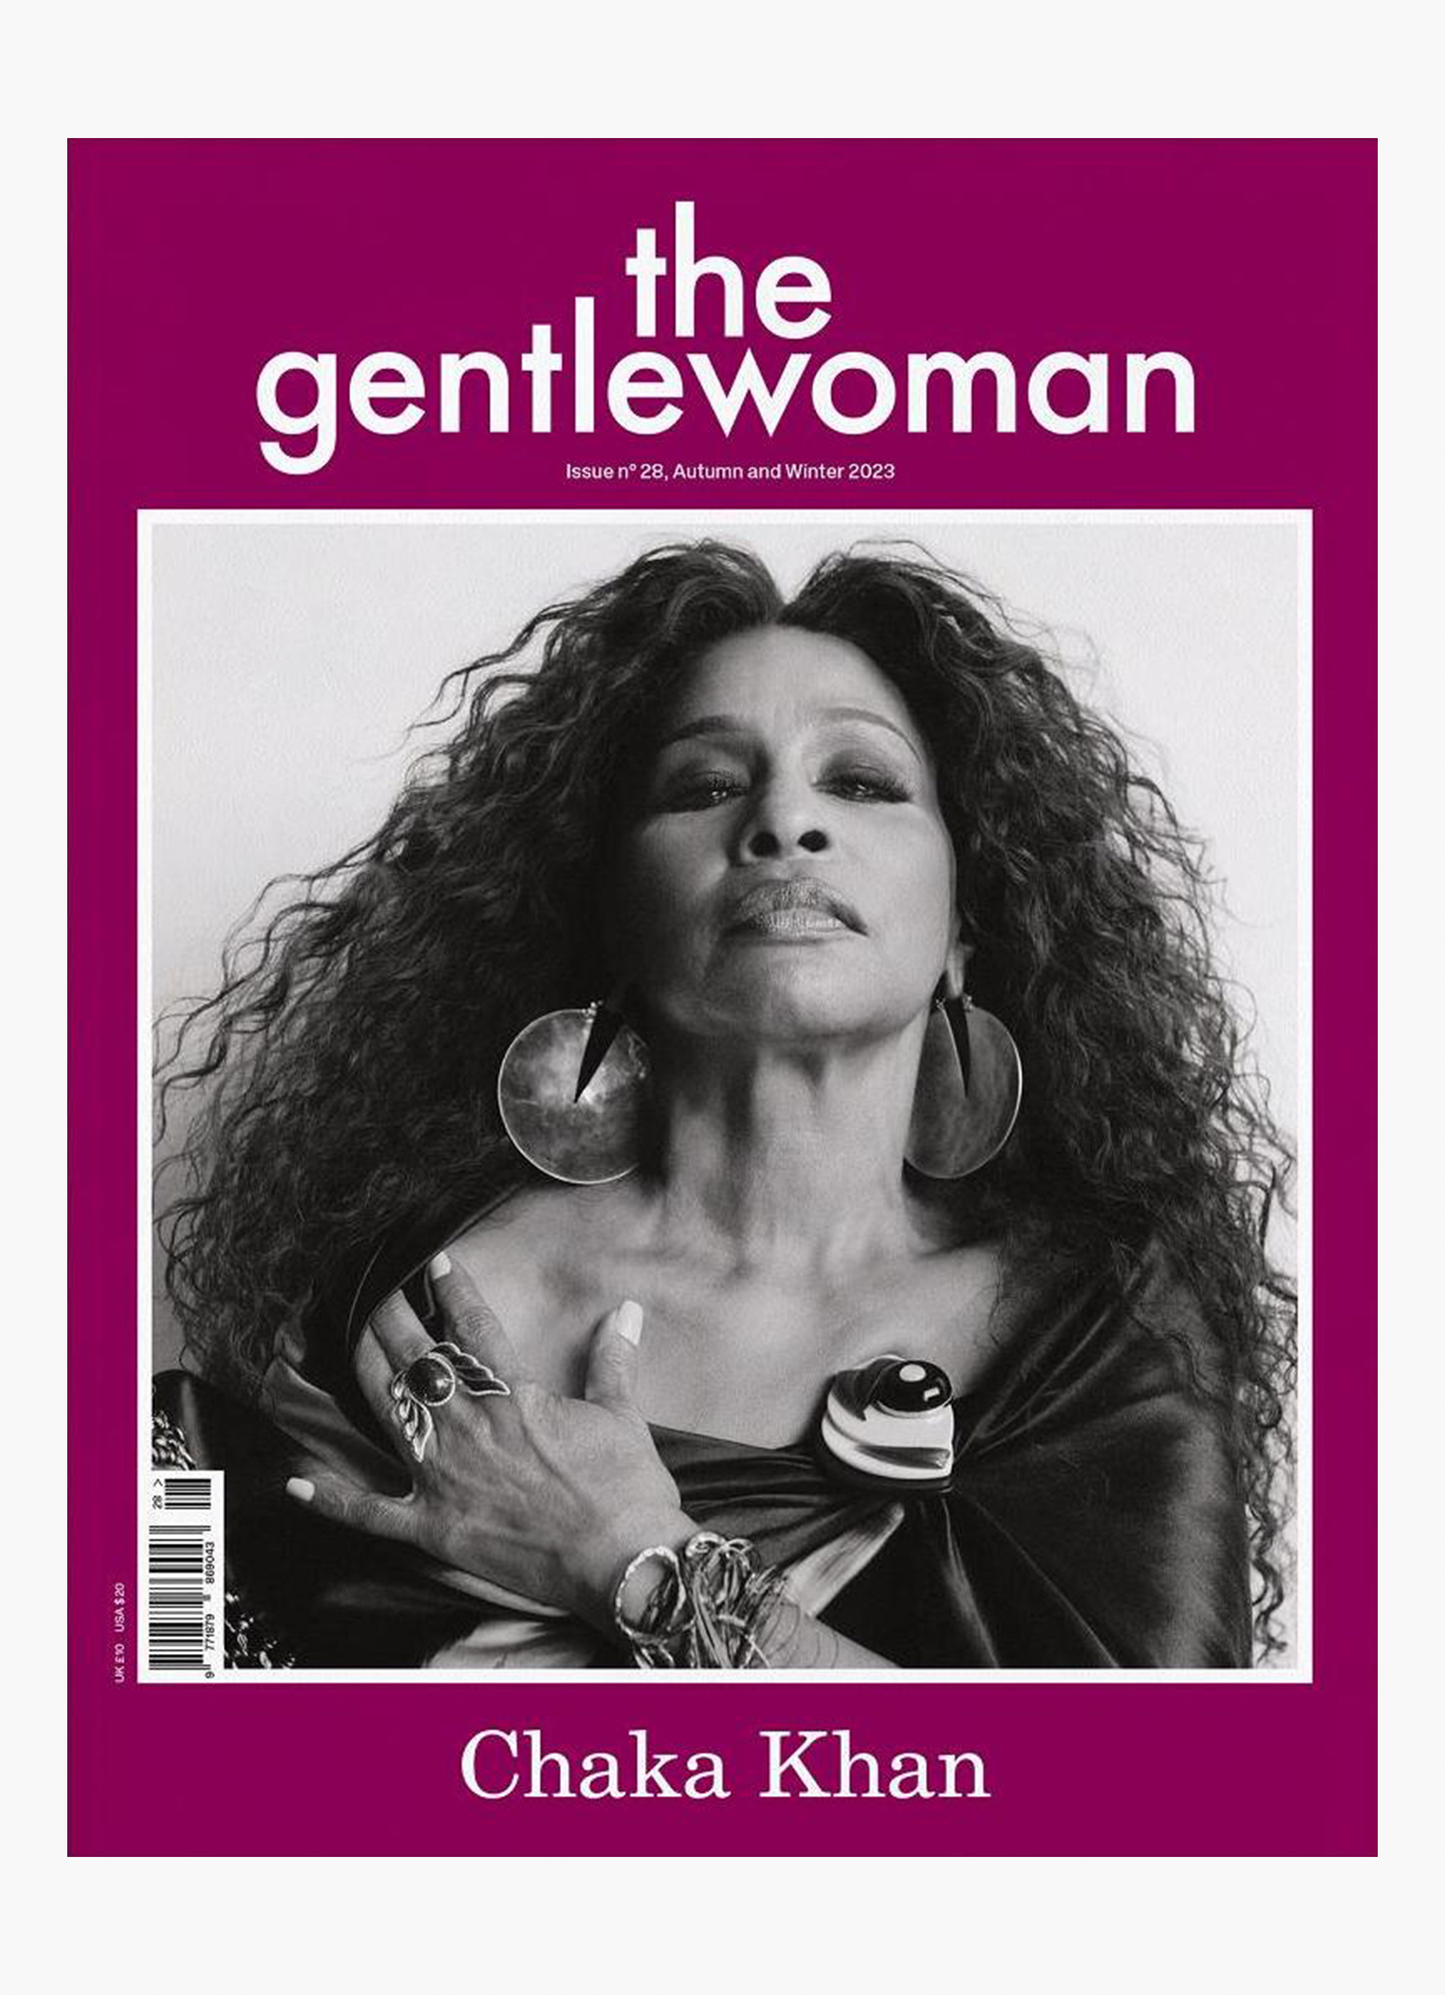 The Gentlewoman, Issue 28